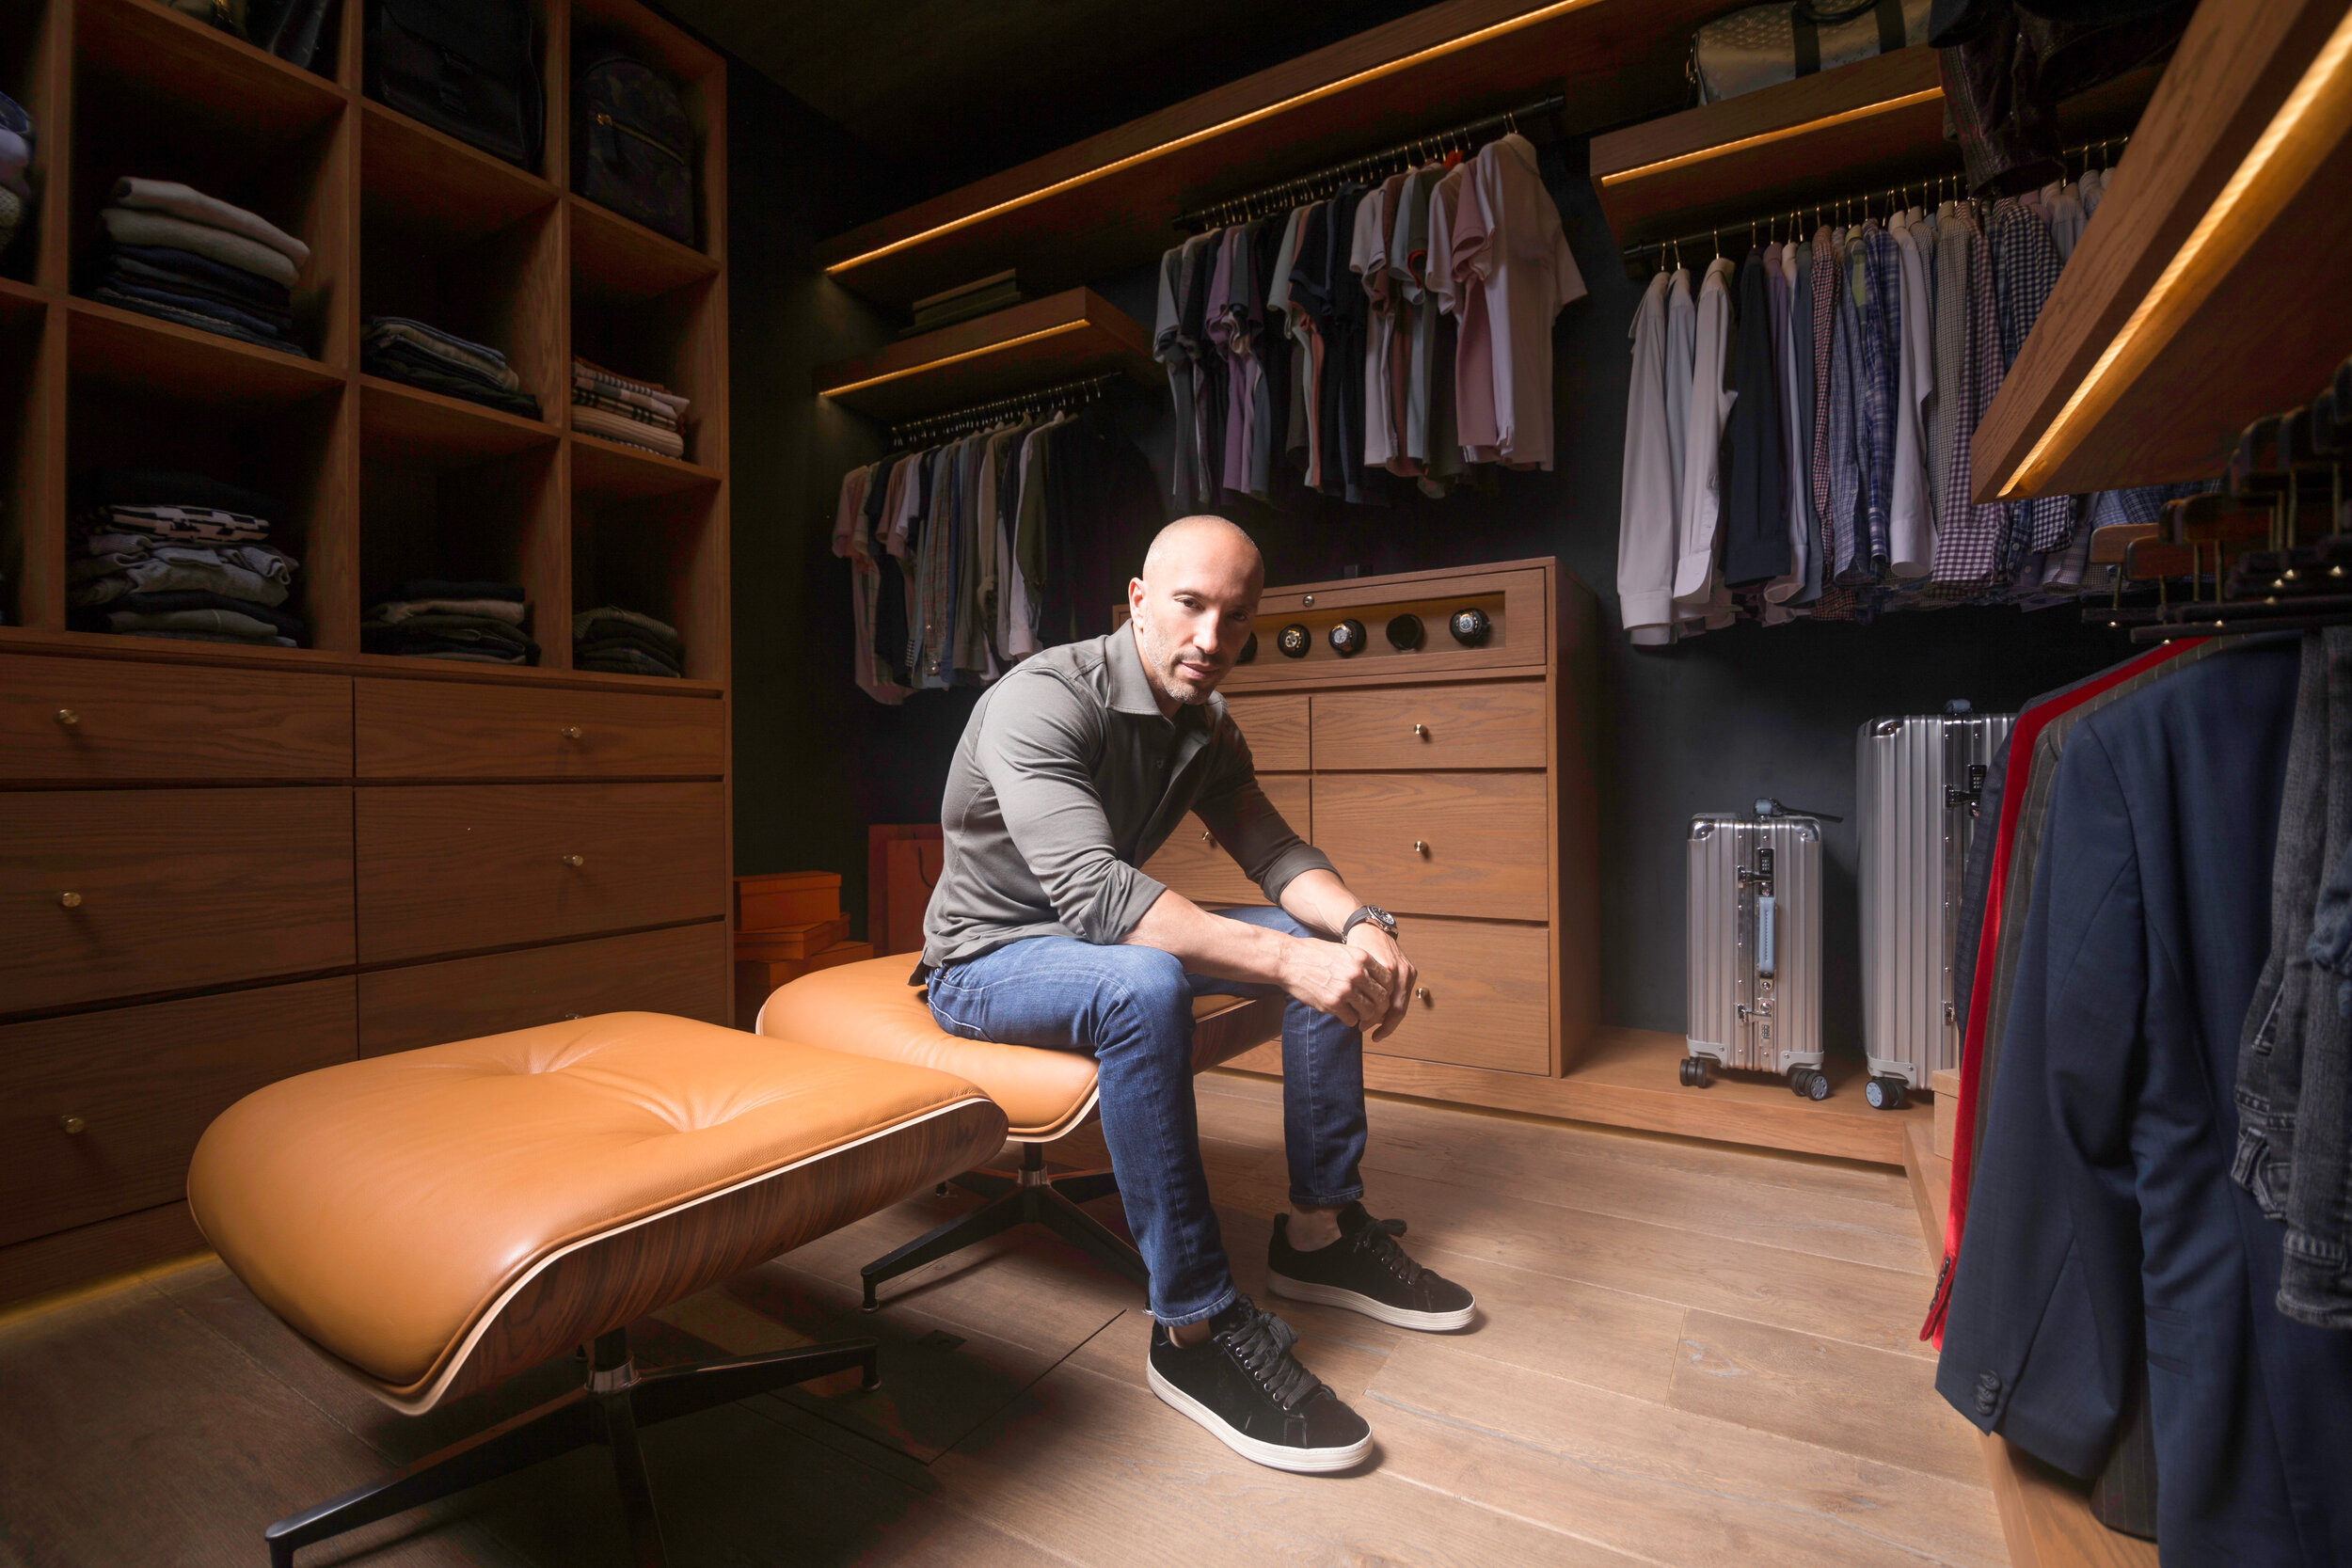 ATHLEISURE MAG | #63 MAR 2021 LUXURY REAL ESTATE OWNER/BROKER OF THE OPPENHEIM GROUP, CONTRACTOR, DEVELOPER AND STAR OF NETFLIX'S SELLING SUNSET, JASON OPPENHEIM